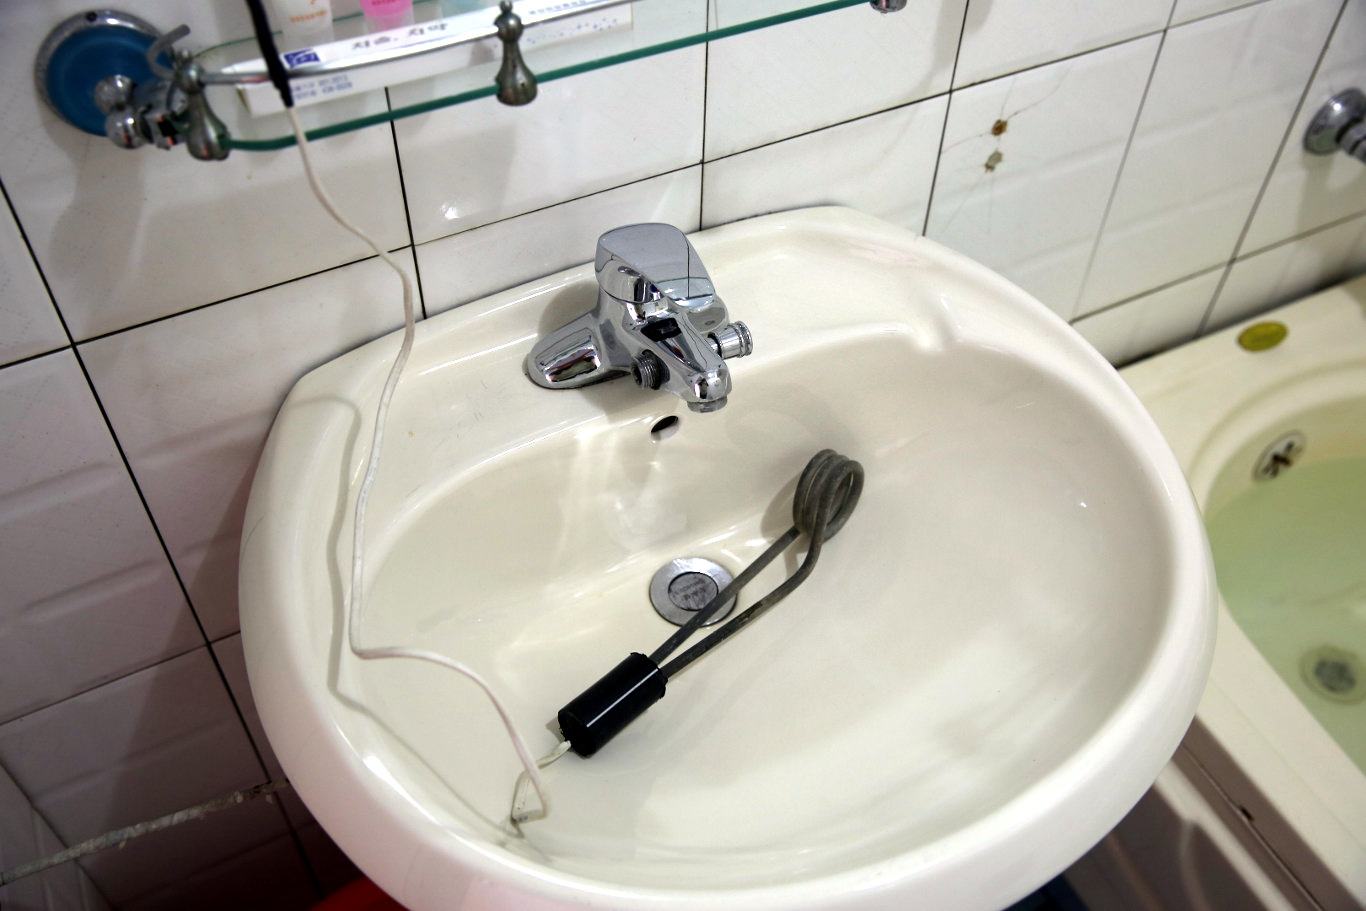 Sink at a toilet in a villa in the Majon bathing resort, North Korea. Notice the electric rods used to heat the water